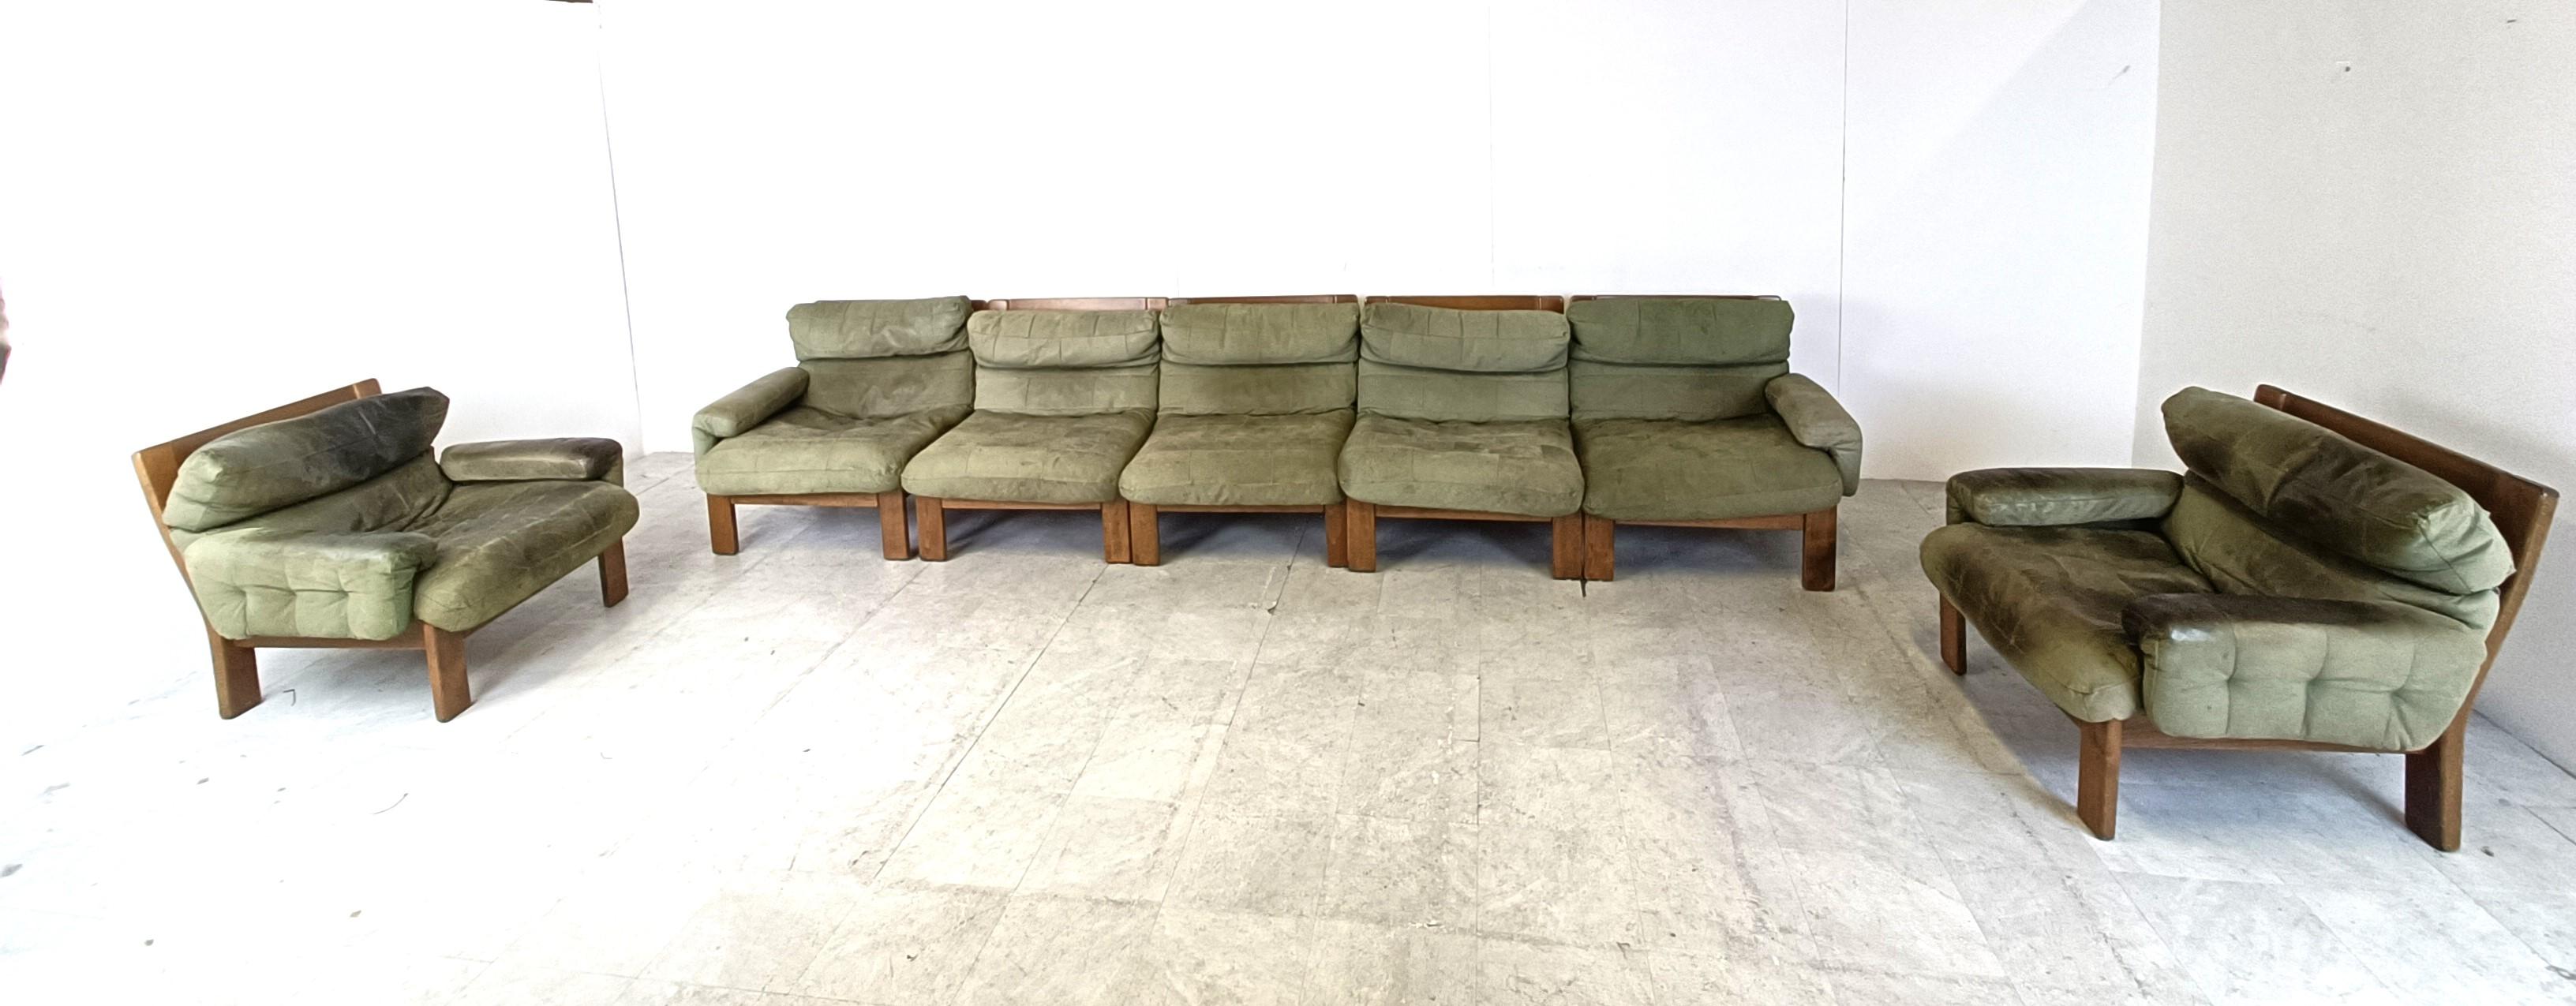 Vintage olive green patinated patchwork leather modular sofa with two armchairs.

The sofas have a very sturdy oak frame and gorgeous dark green leather tufted cushions.

Beautifully aged sofa set with a great vintage look.

very comfortable and